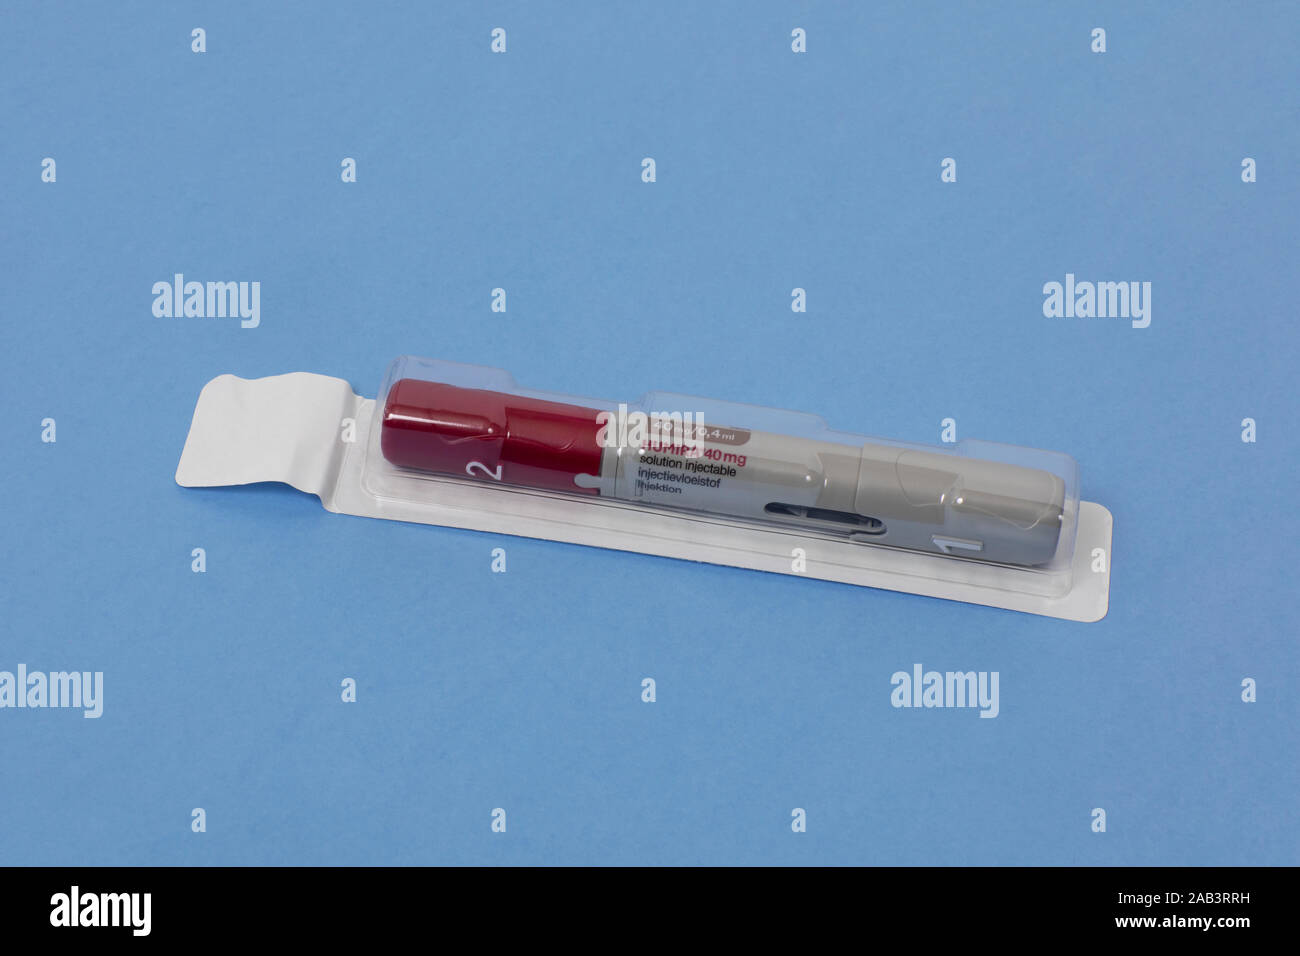 Eindhoven, the Netherlands, 12th November 2019. Humira, adalimumab. A closed package containing a pen with a needle for a patient to inject themselves Stock Photo